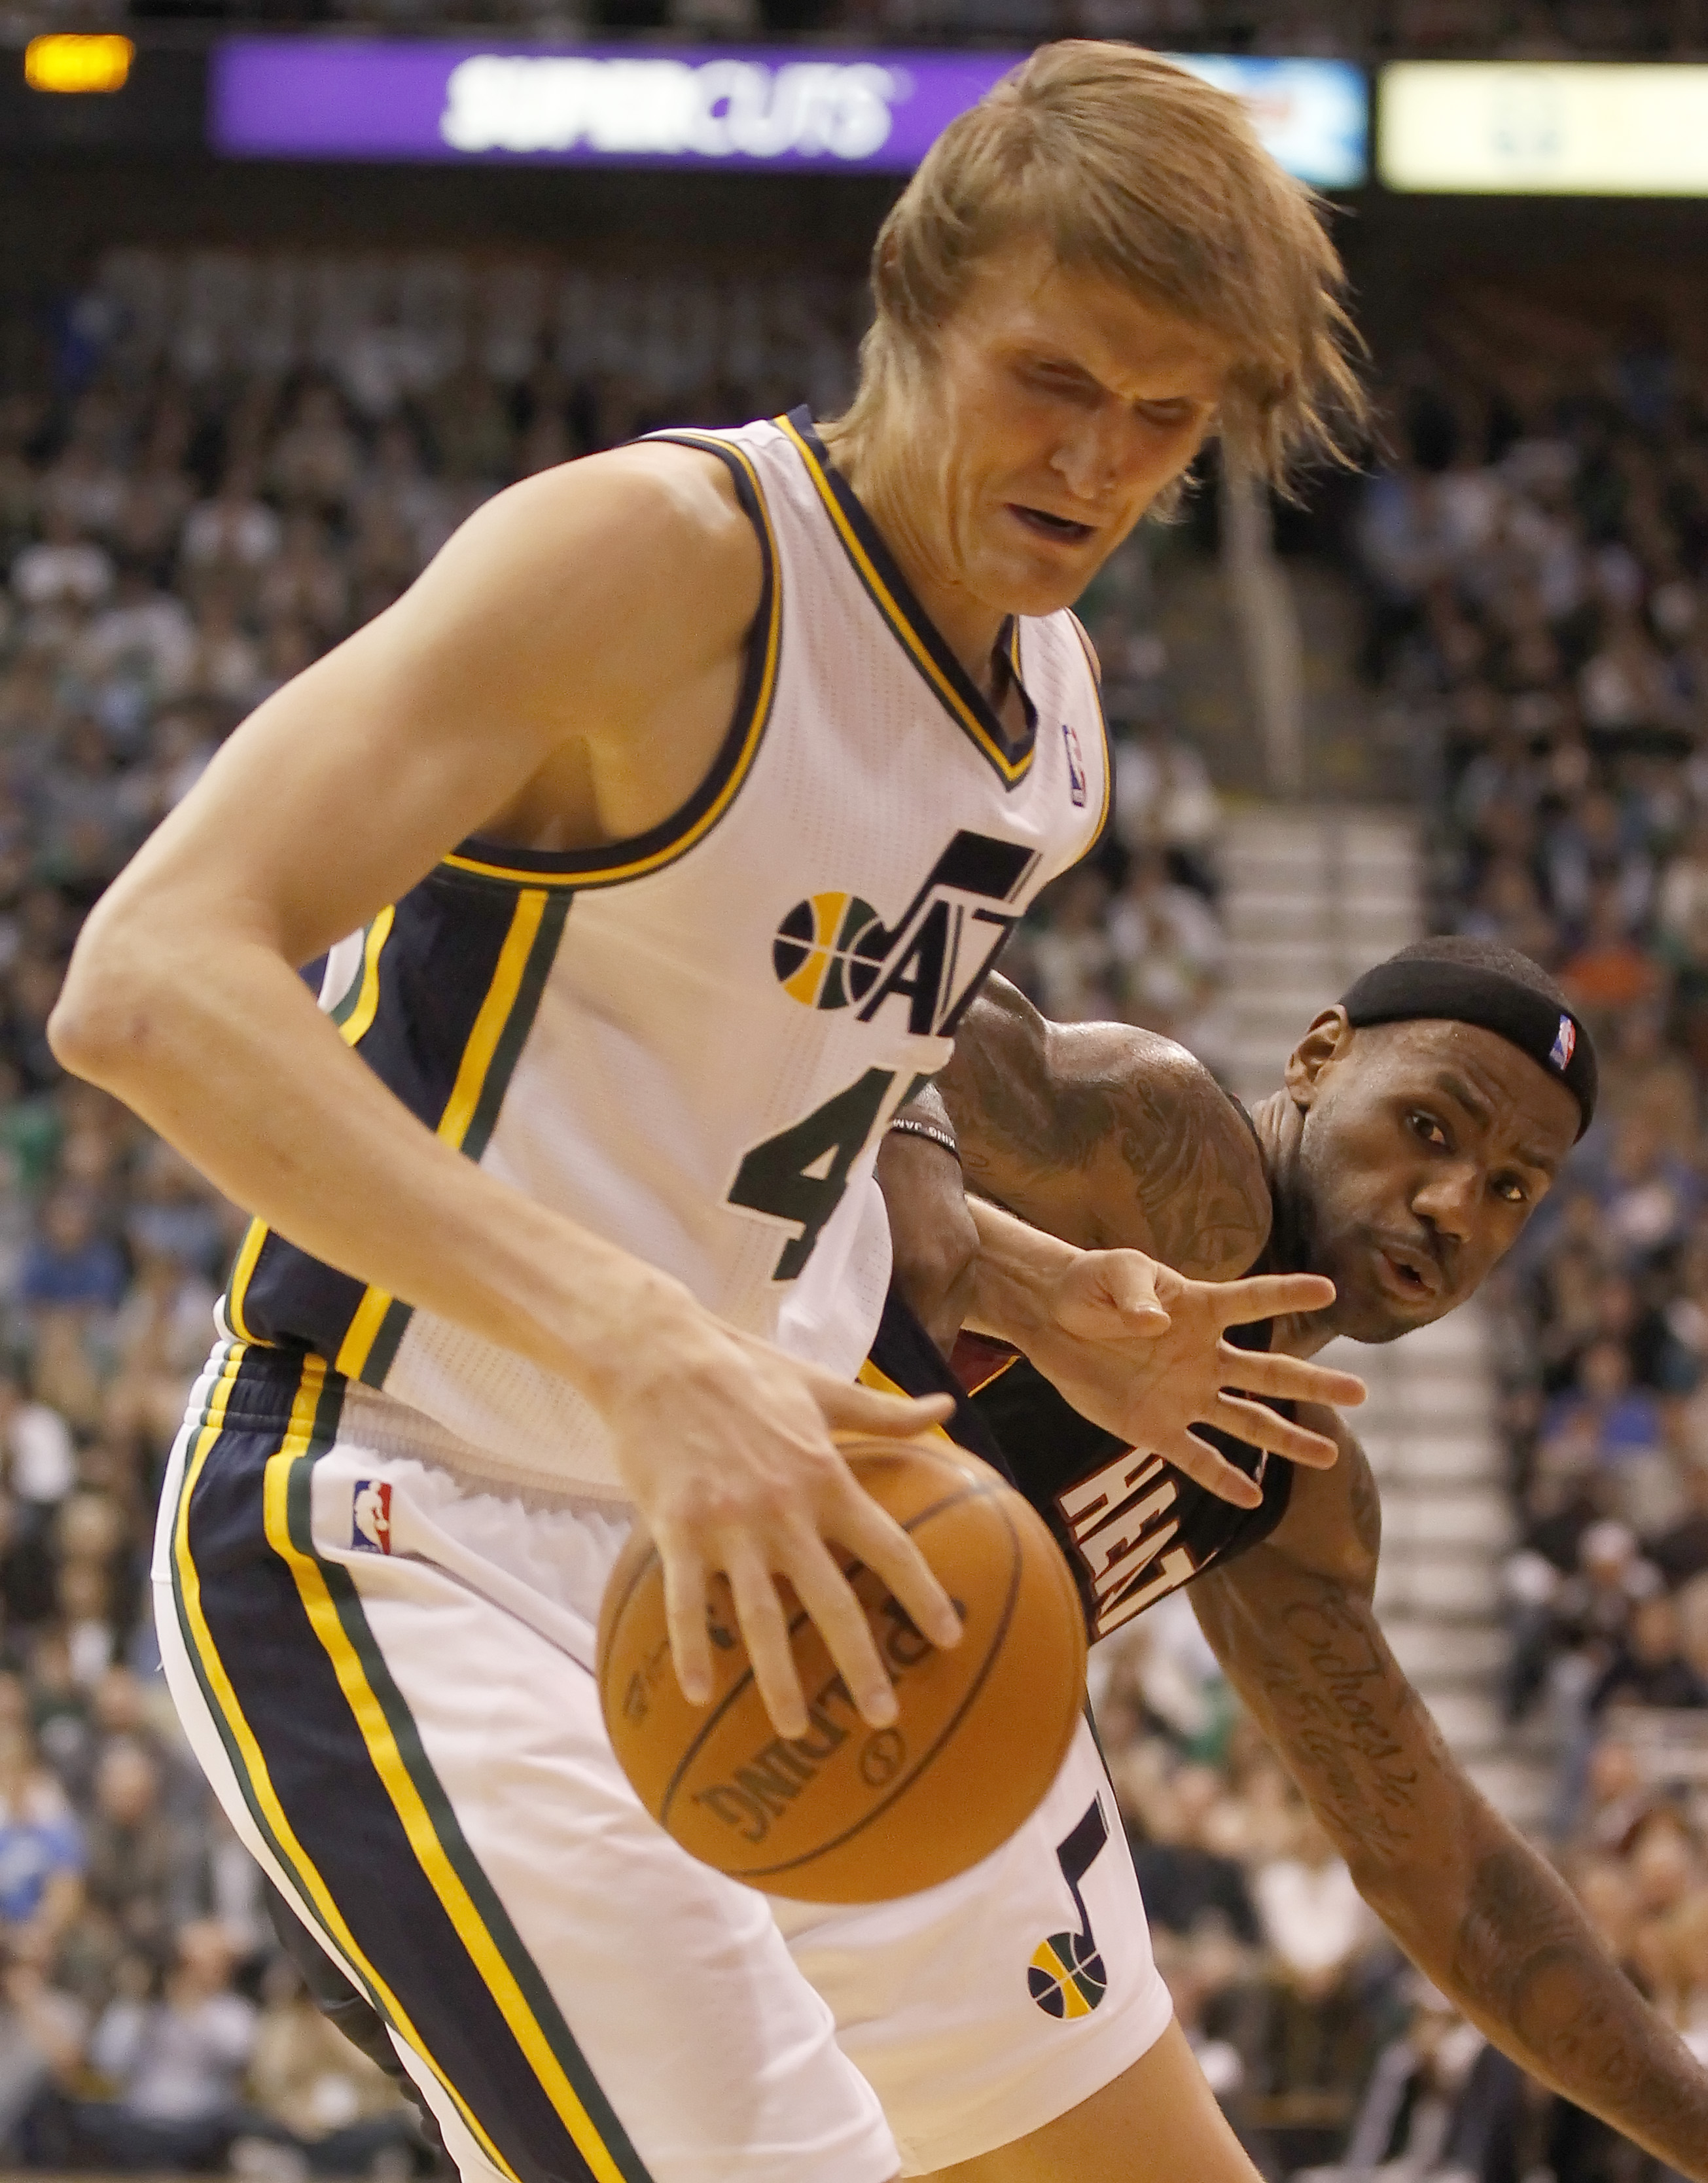 SALT LAKE CITY, UT - DECEMBER 8:  Andrei Kirilenko #47 of the Utah Jazz has the ball knocked away by LeBron James #6 of the Miami Heat during the second half of an NBA game December 8, 2010 at Energy Solutions Arena in Salt Lake City, Utah. The Heat beat